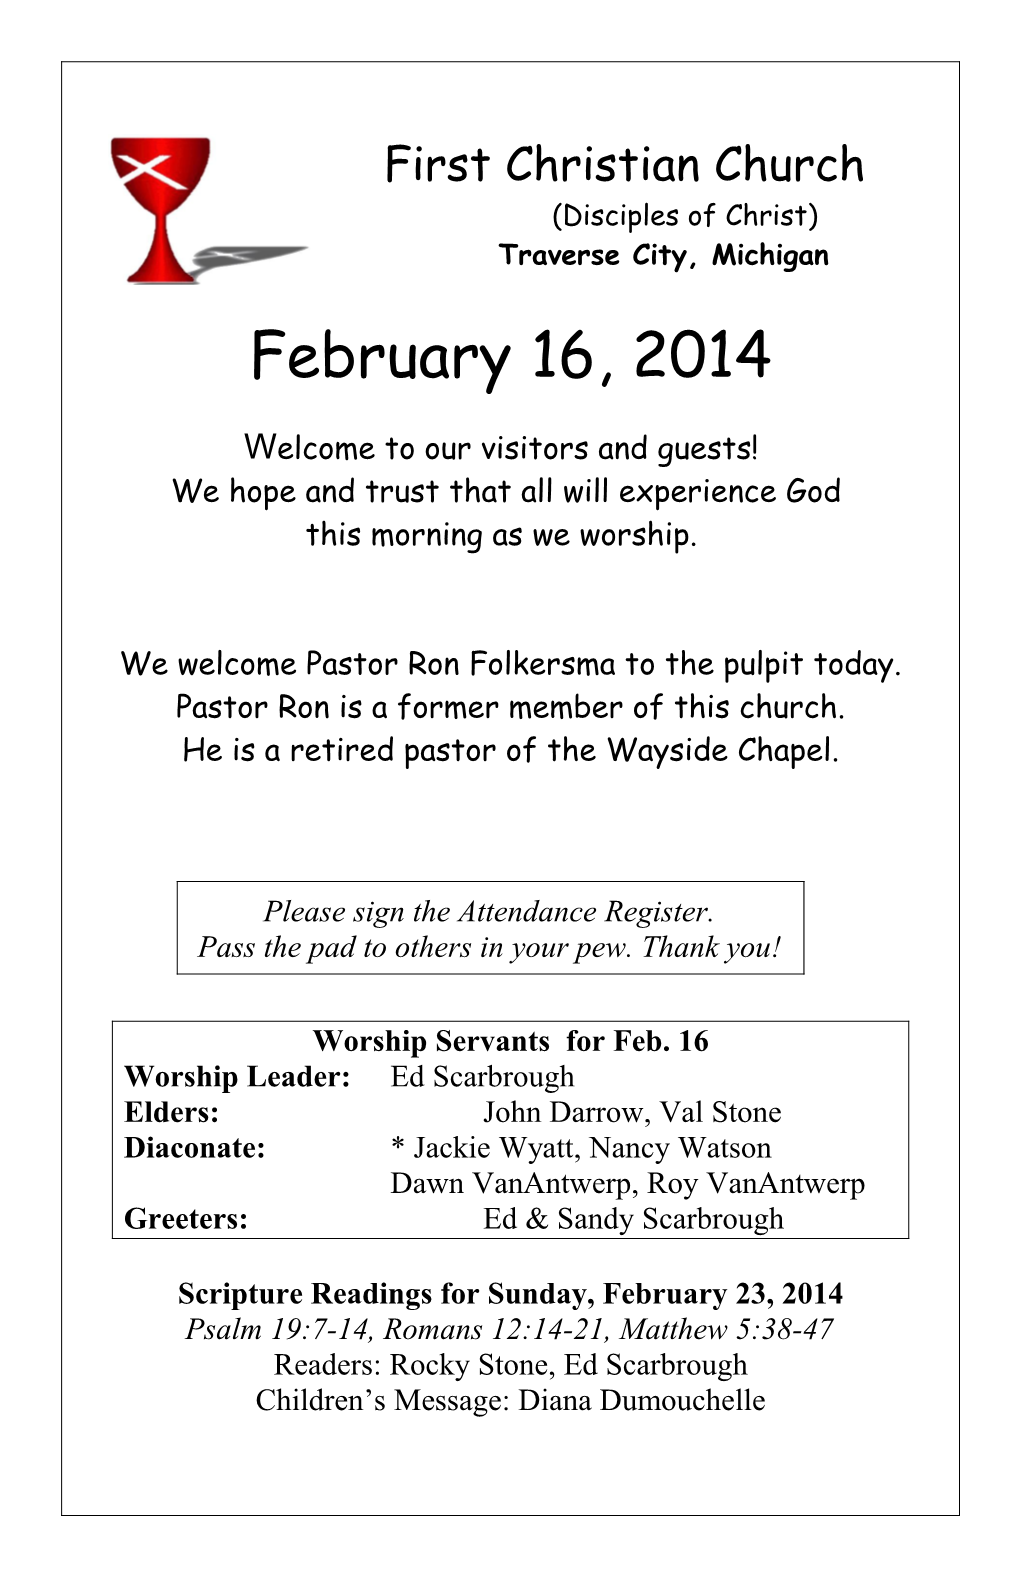 This Week at First Christian Church s1